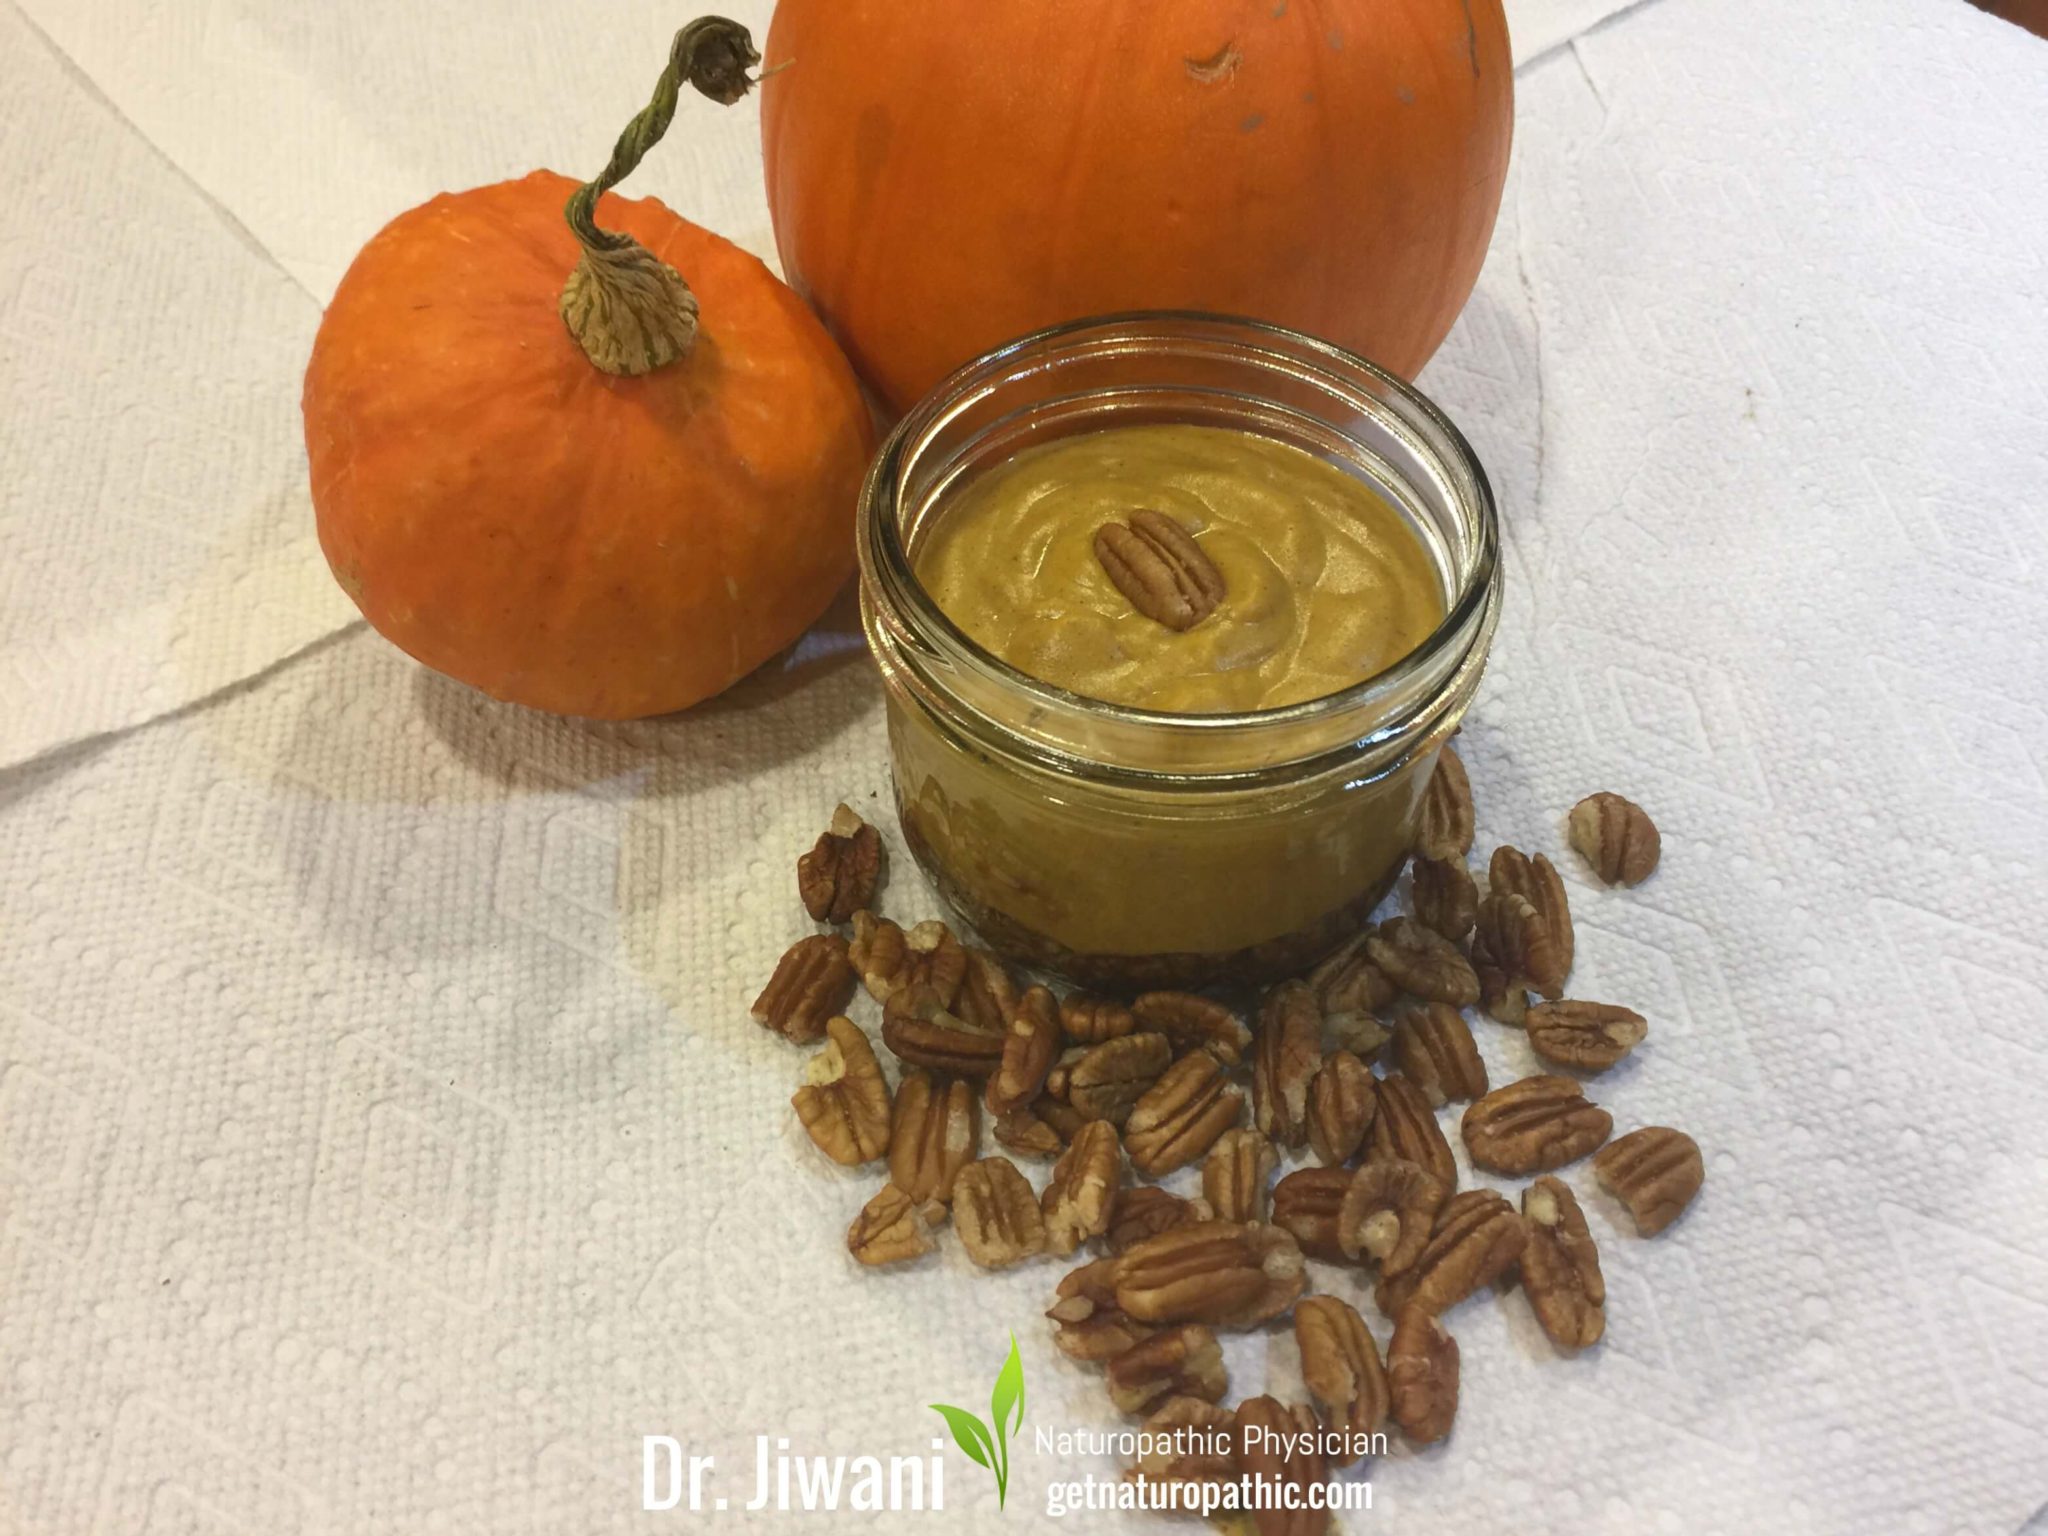 Dr. Jiwani's No Bake Pie Crust is Yummy, Low Carb, Gluten-Free, Egg-Free, Dairy-Free, Soy-Free, Corn-Free, Ideal For Paleo, Keto & Allergy-Free Diets